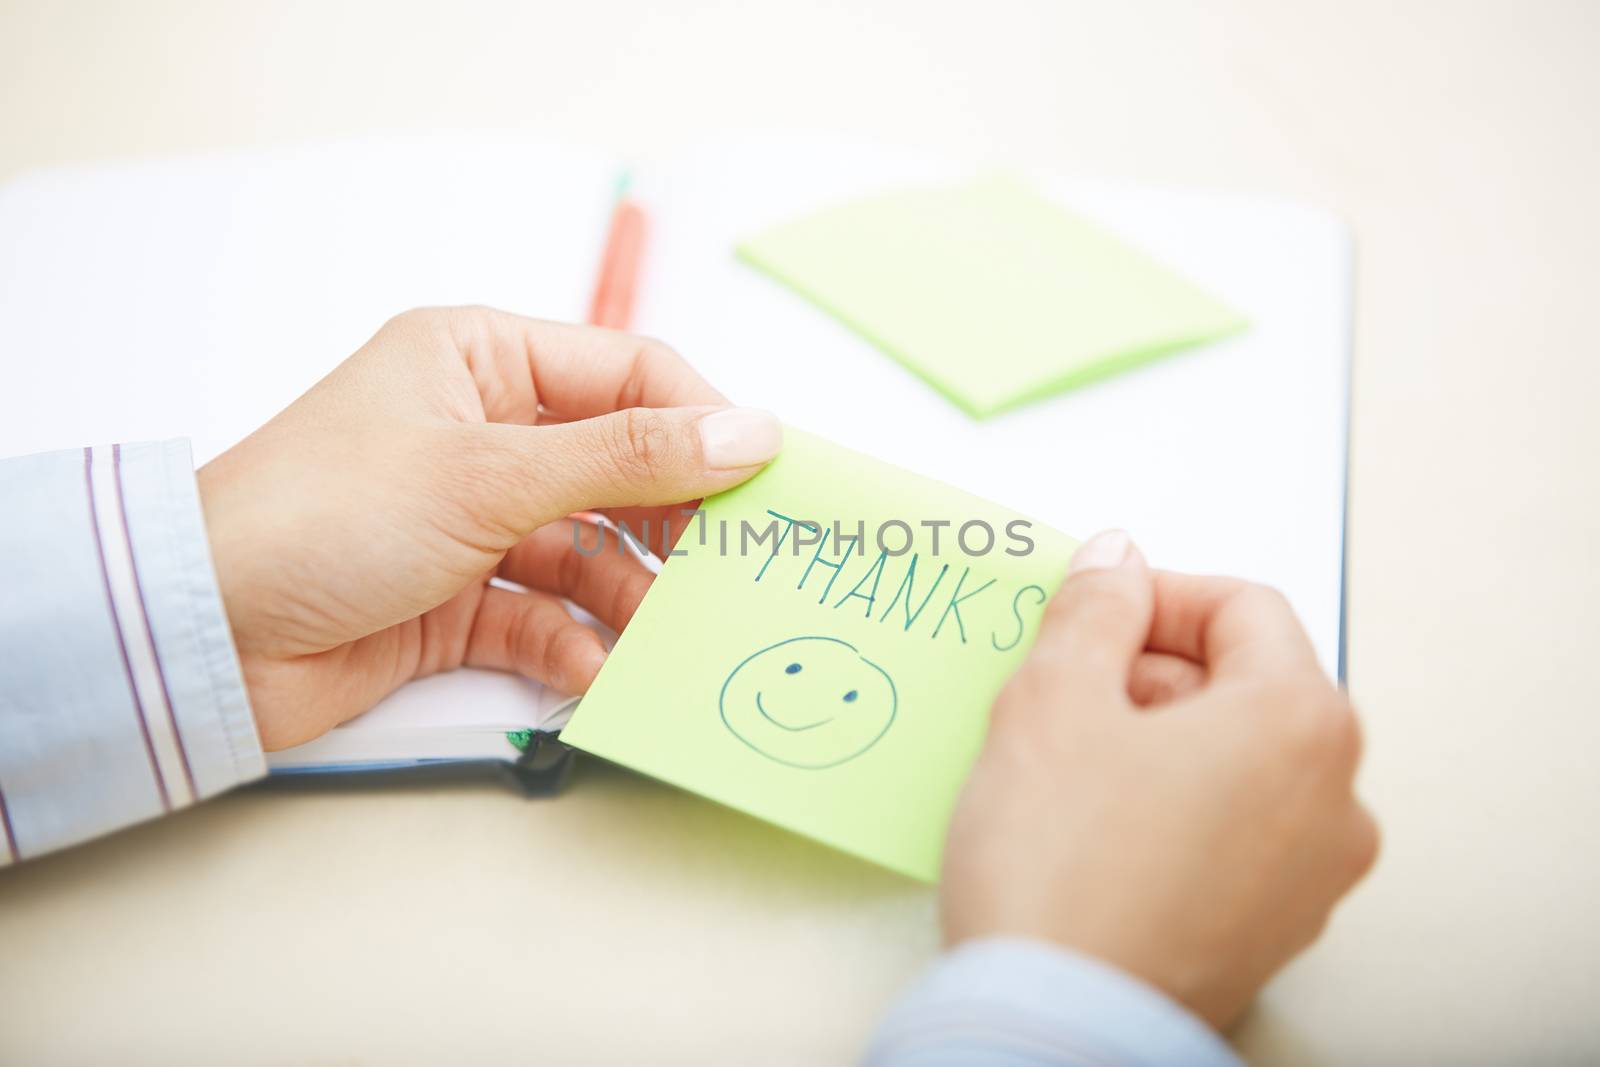 Hands of woman holding sticky note with Thanks text